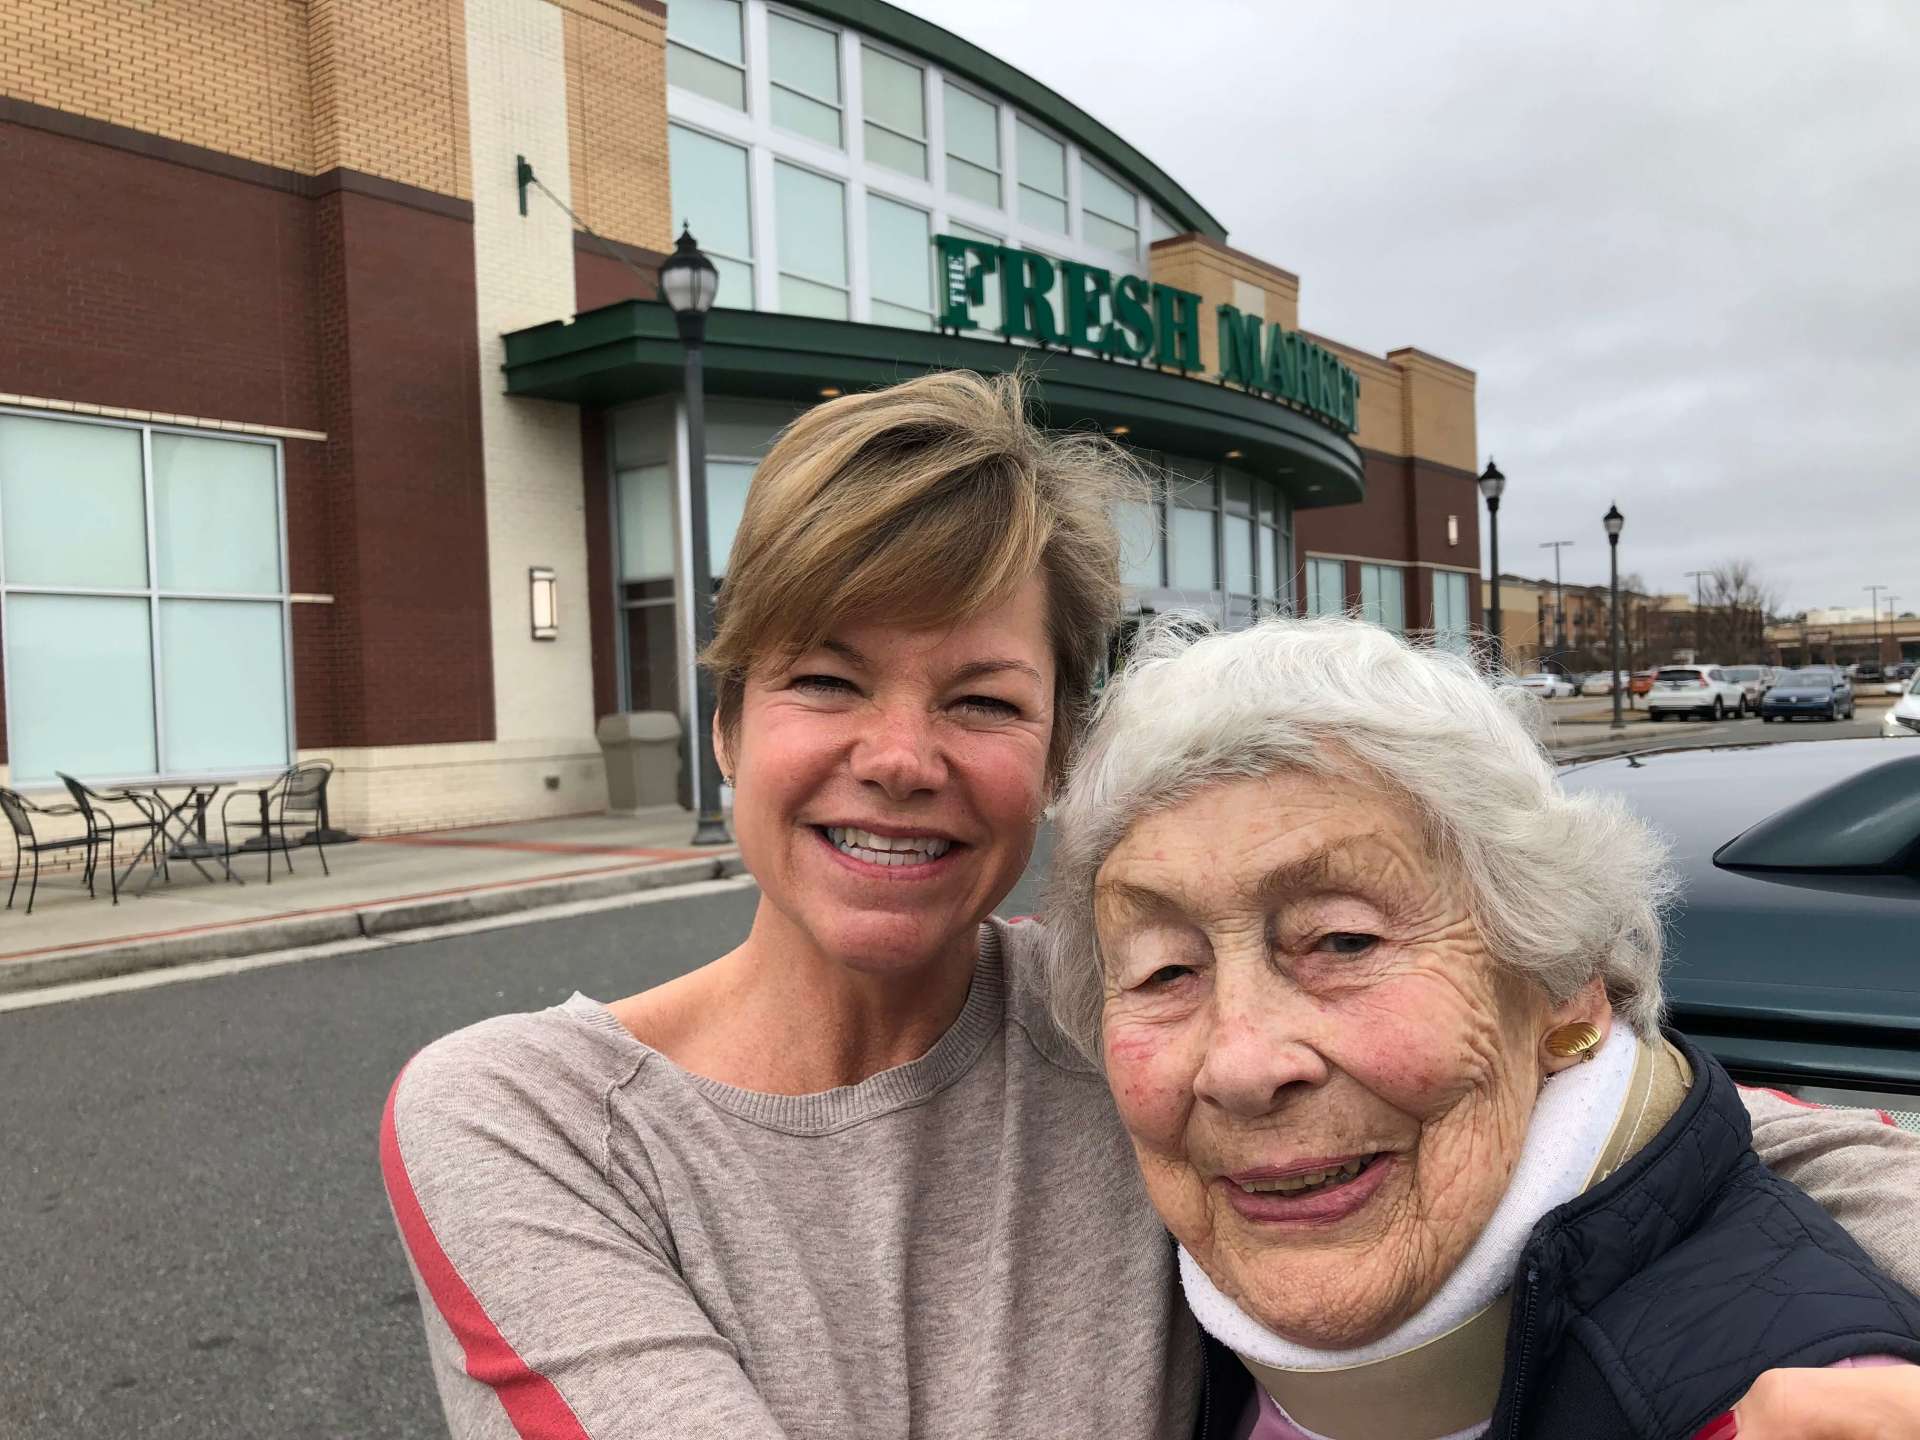 Senior Home Care Client and Caregiver visit the grocery store